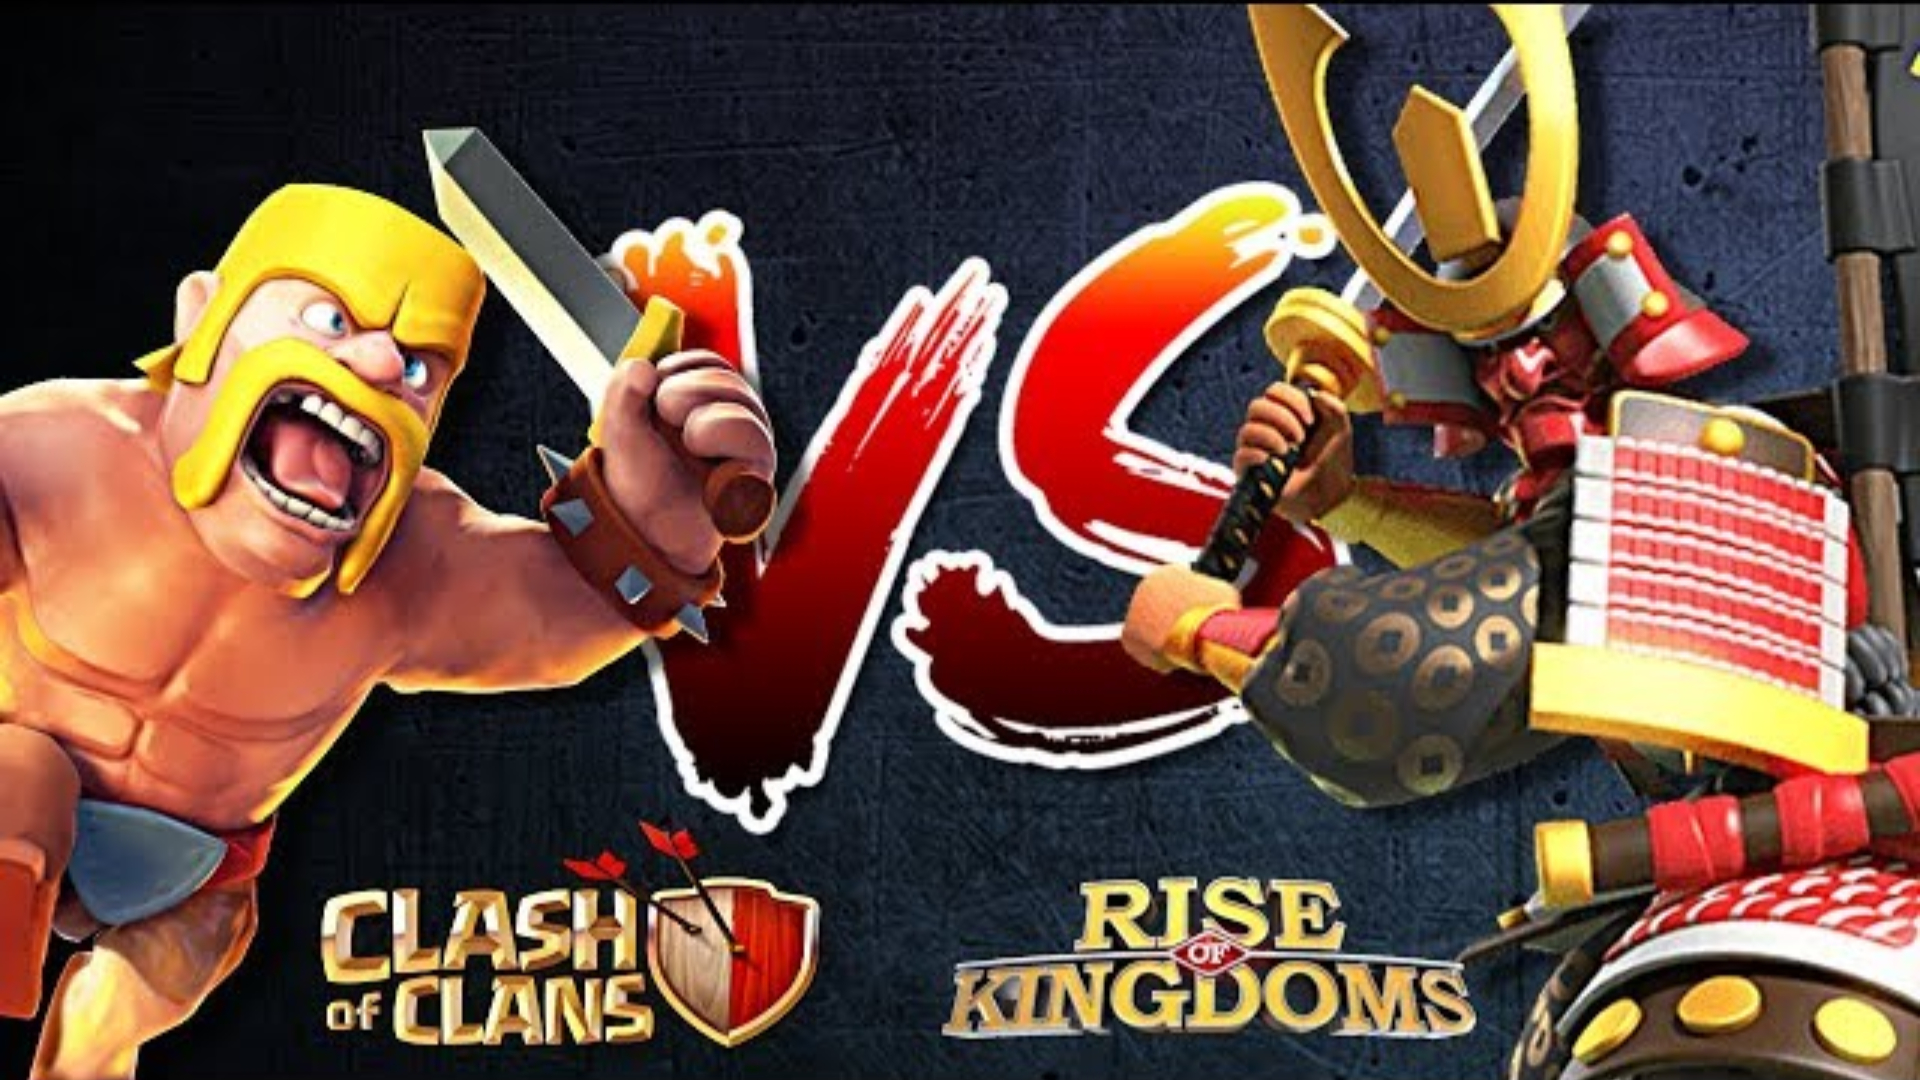 Clash of Clans vs Rise of Kingdoms: A Battle of Strategy Building Games image